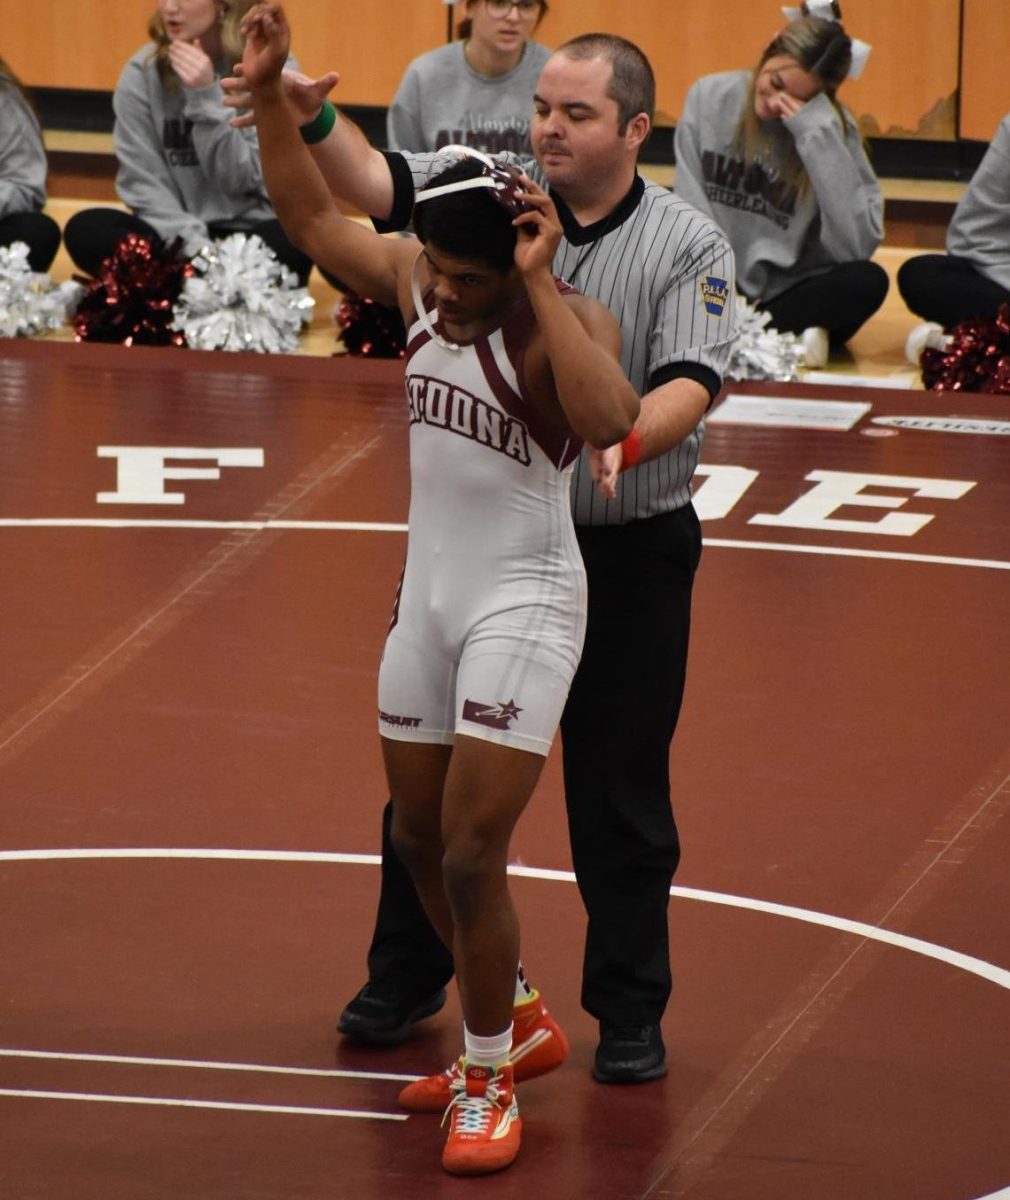 Winning for a Reason. sophomore Ty-Kear Davis gets his hand raised after winning his match 4-0. Davis has wrestled varsity the whole year and has a record of 8-14.